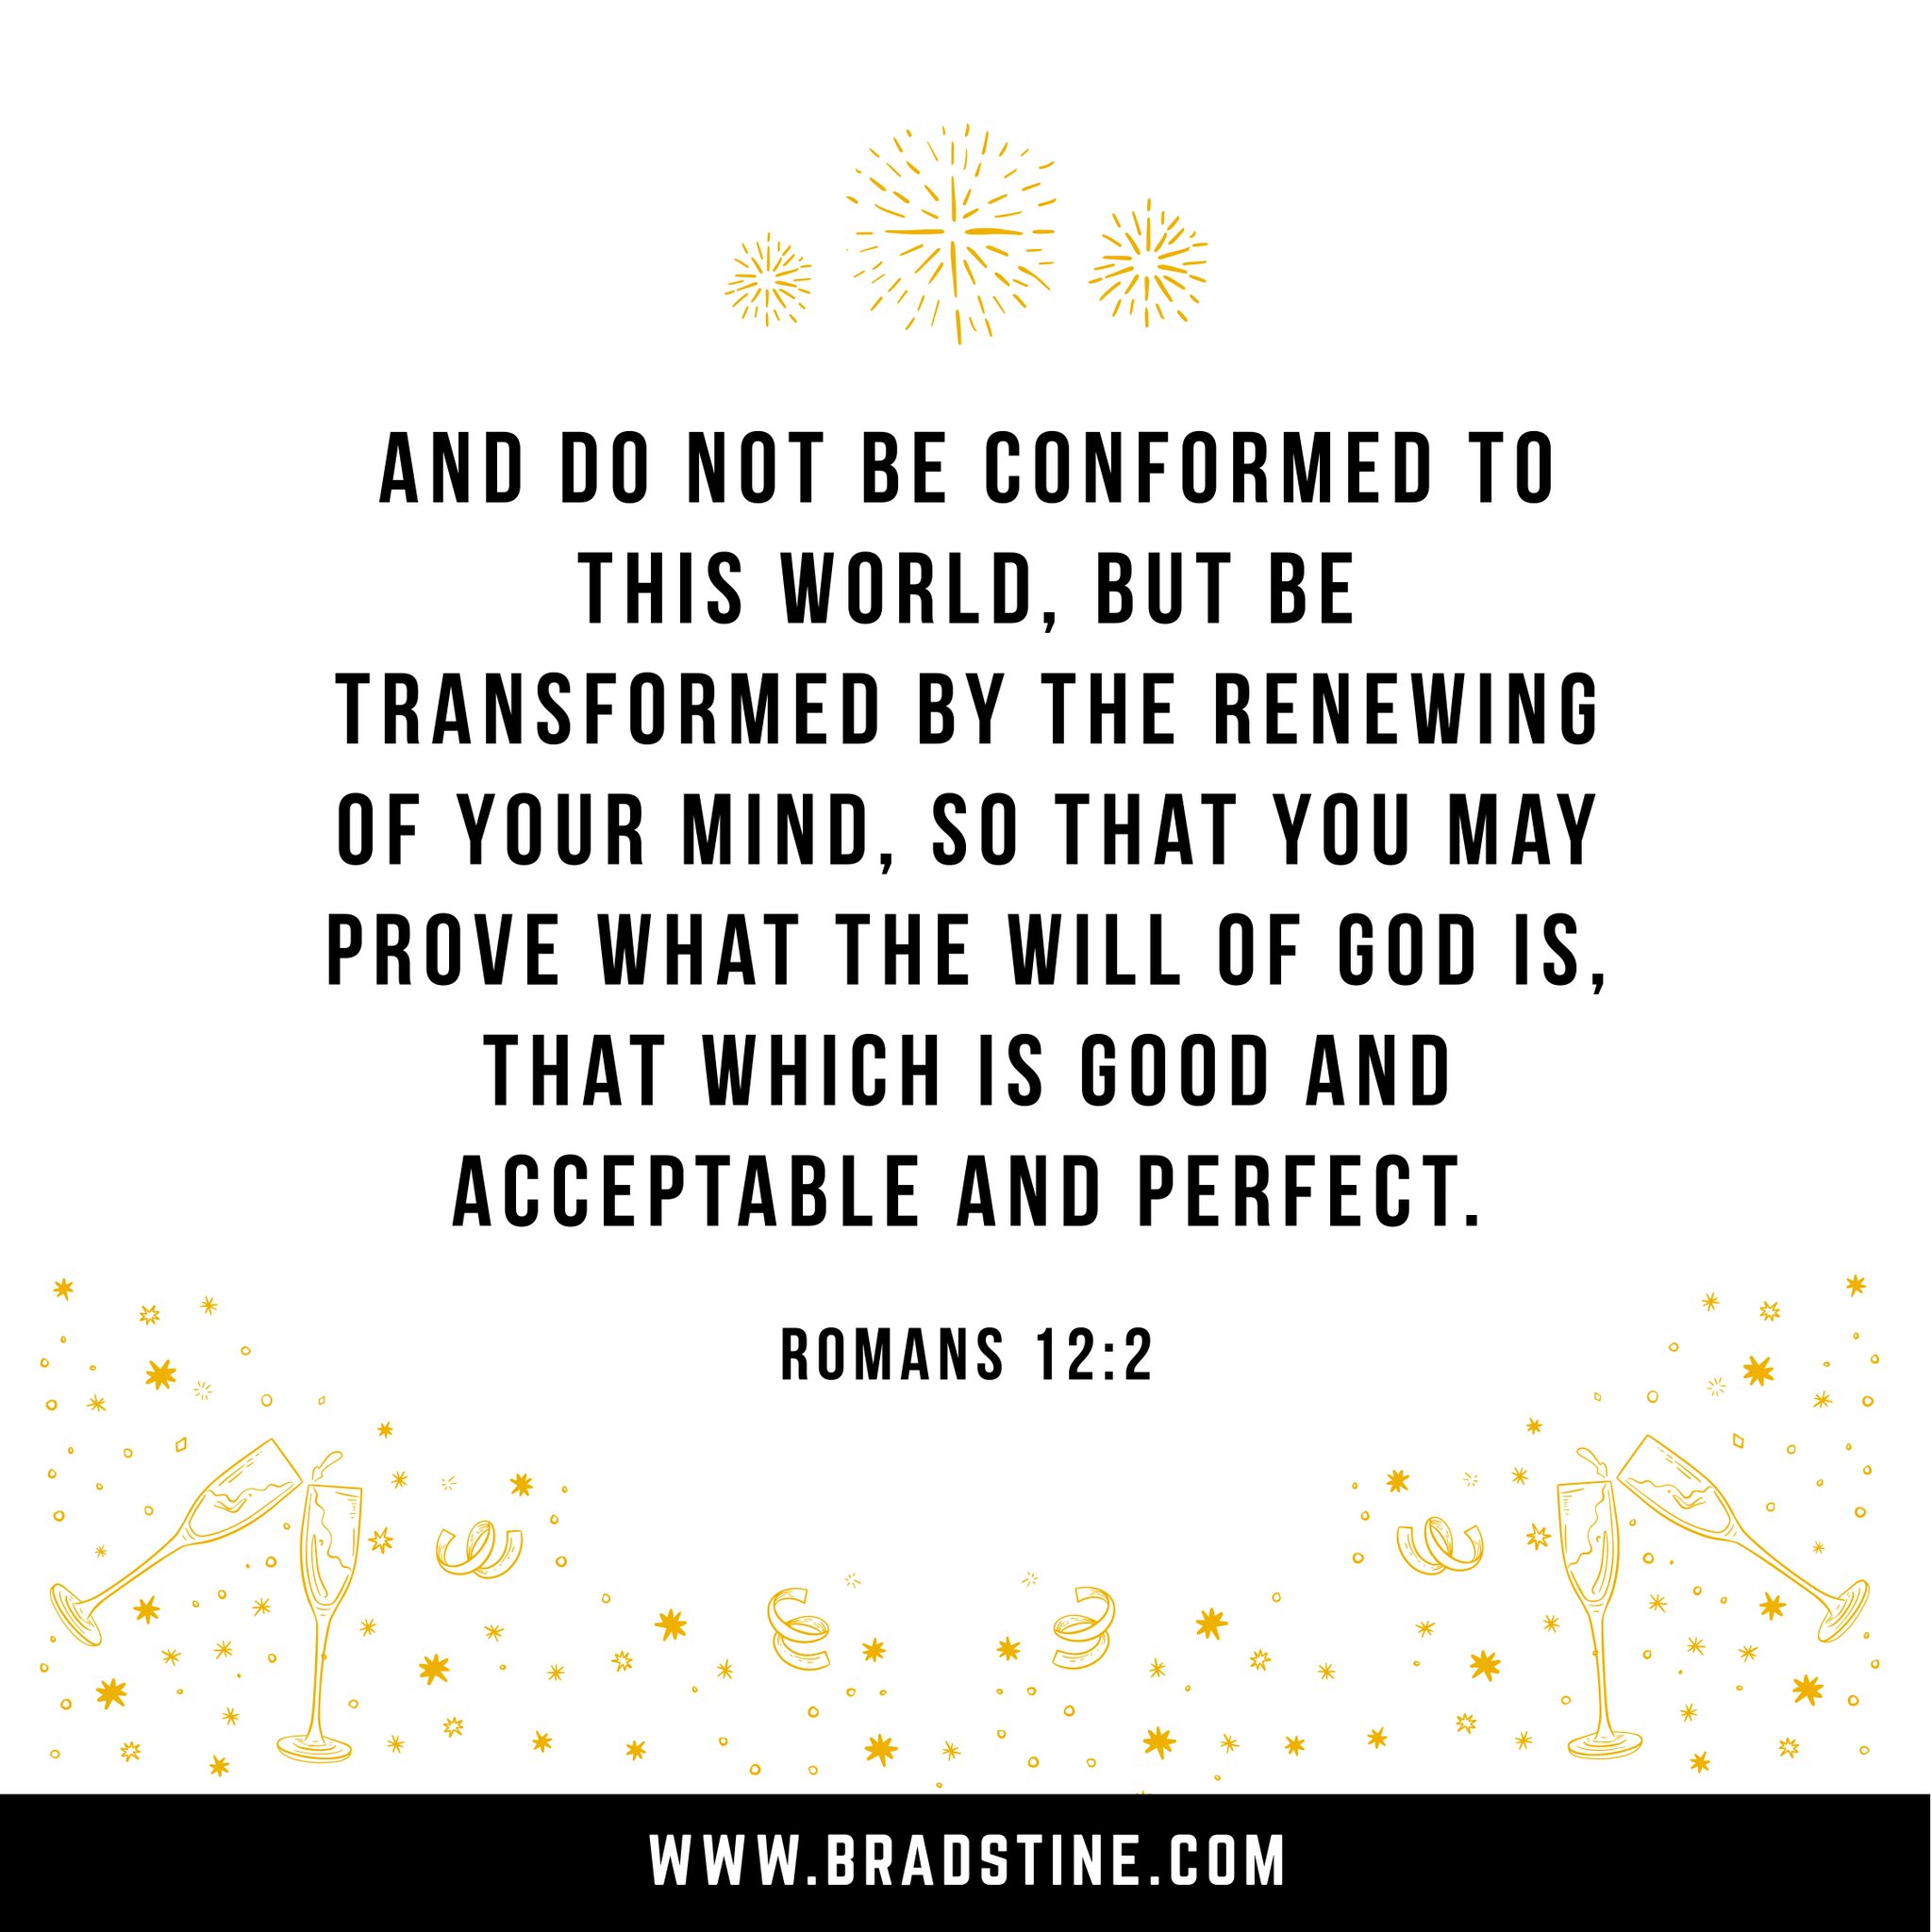 AND DO NOT BE CONFORMED TO ThIS WORLD, BUT BE TRANSFORMED BY THE RENEWING OF YOUR MIND, SO THAT YOU MAY PROVE WhAT THE WILL OF €OD /S, that Which IS GOOD AND ACCEPTABLE AND PERFECT. ROMANS 12.2 WWWBRADSTINE.COM